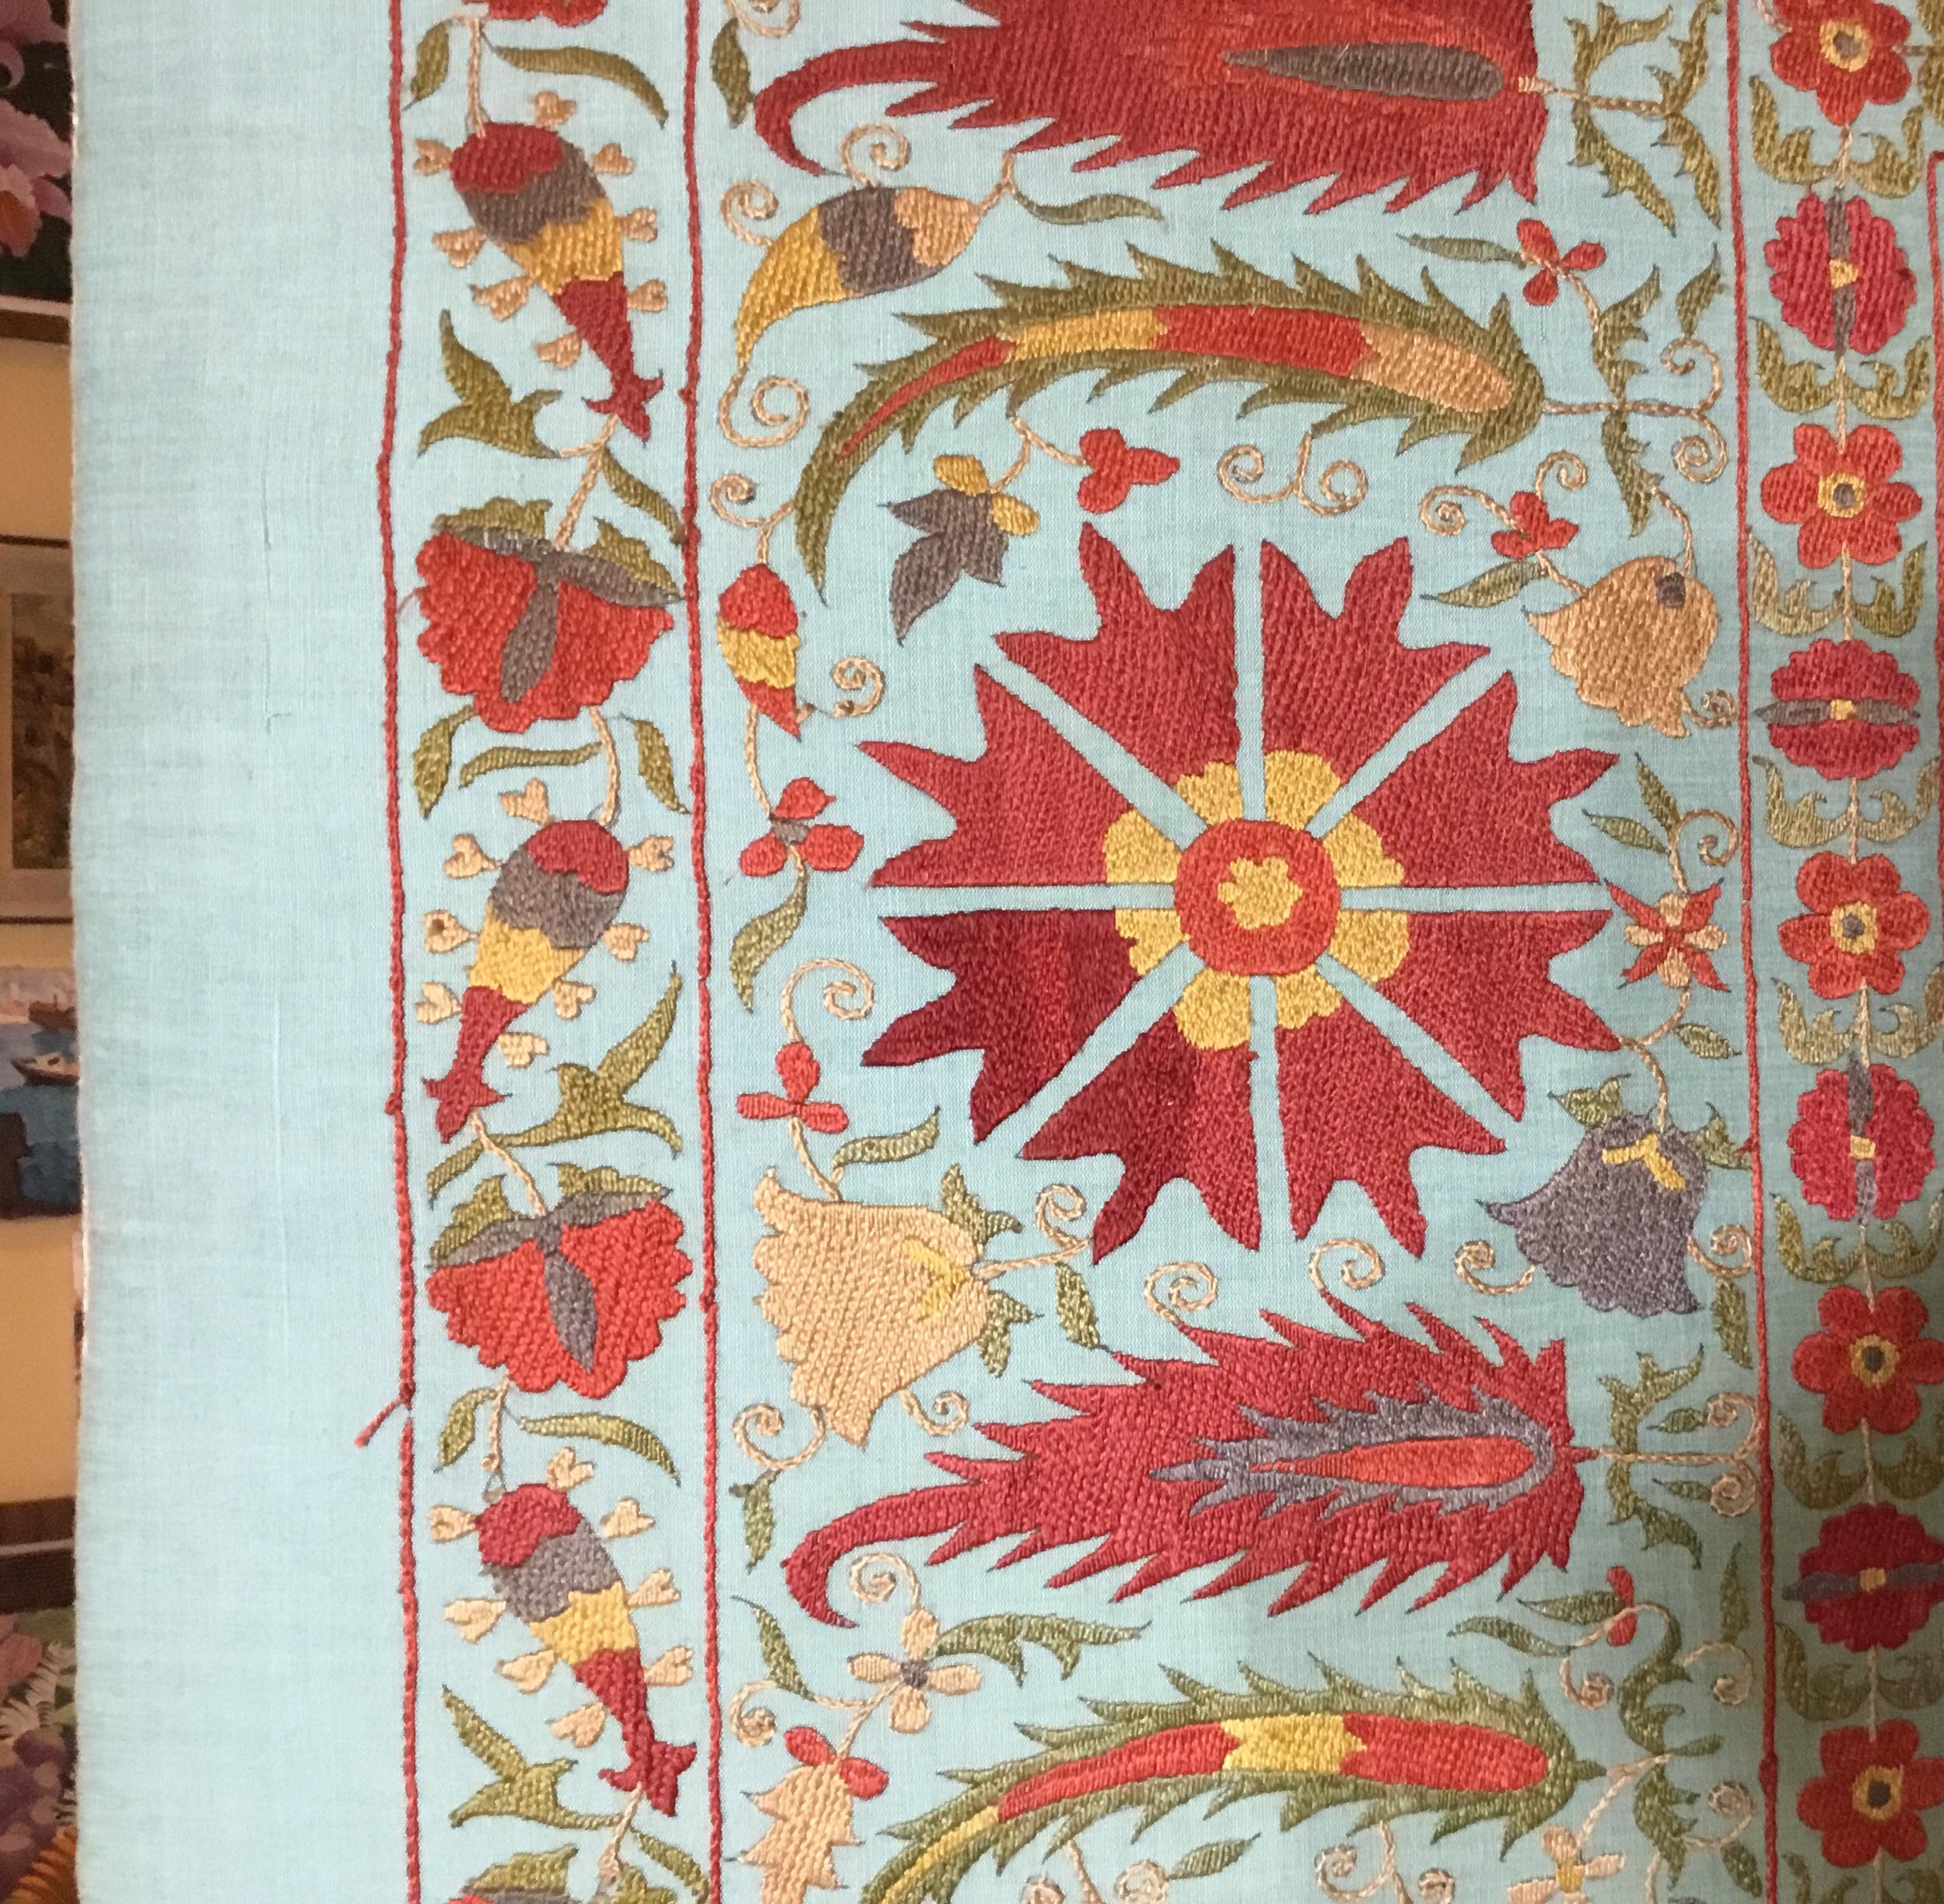 Vintage Hand Embroidery Suzani Screen 12